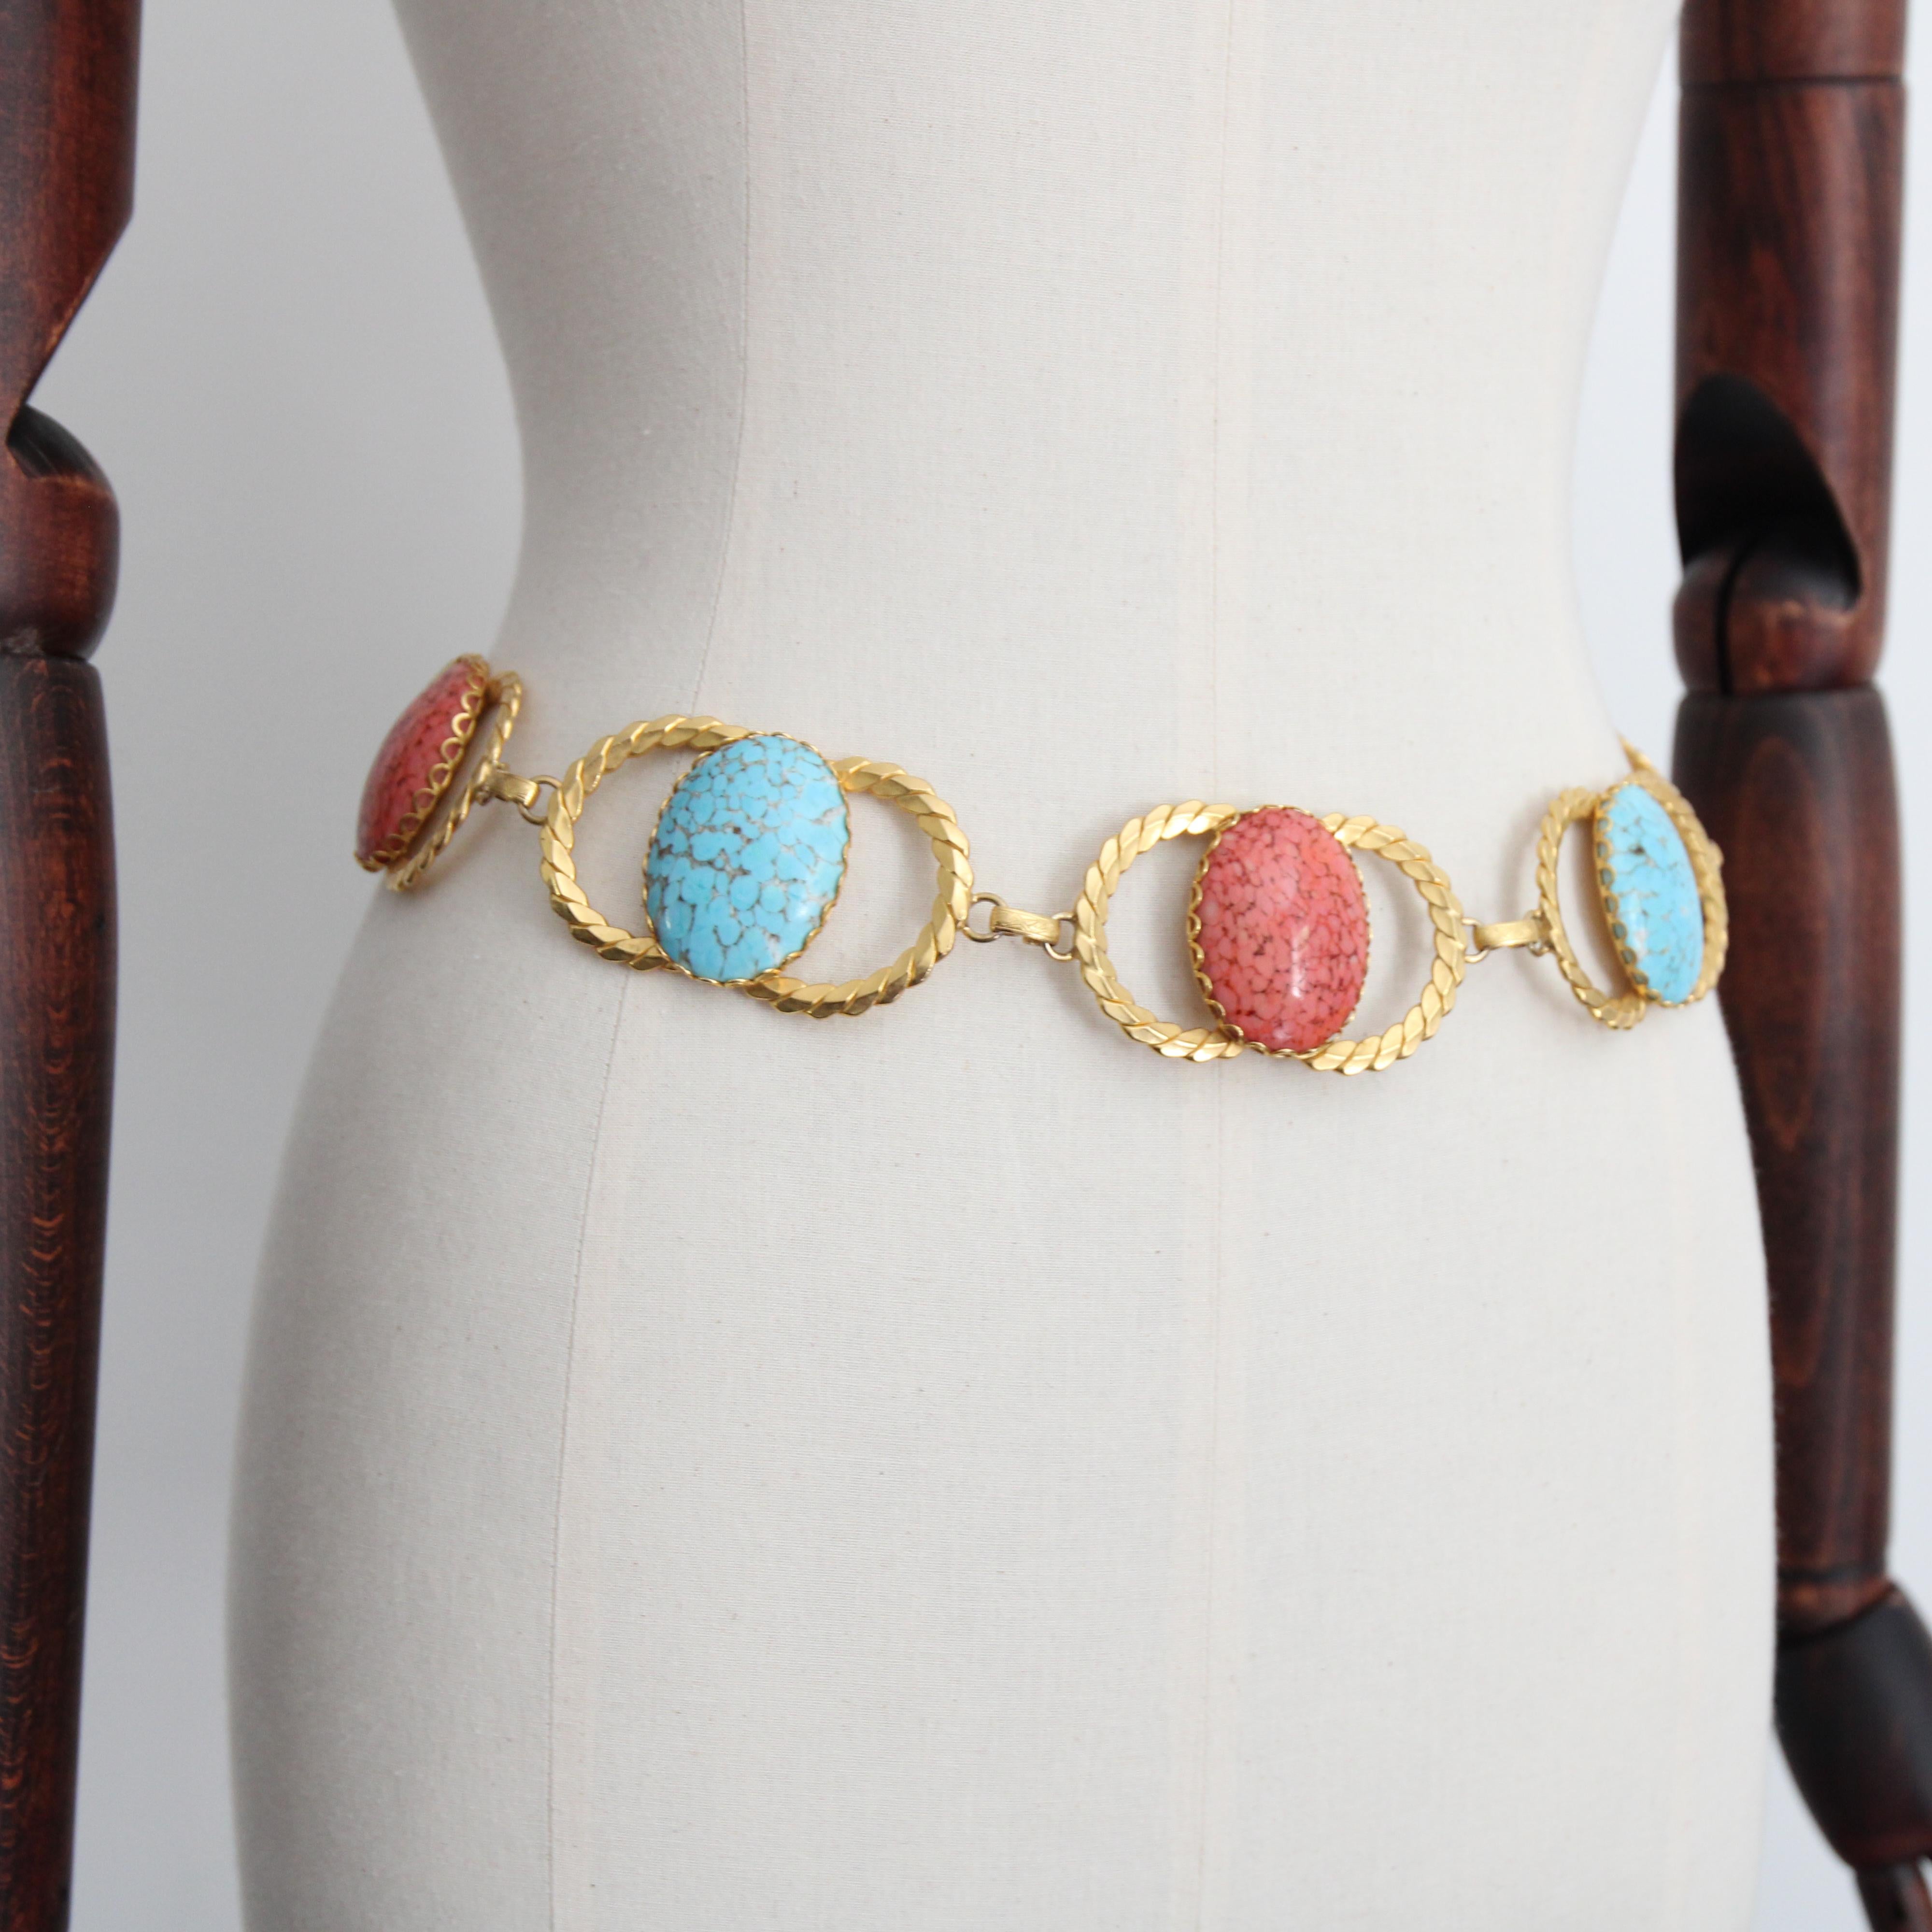 Vintage 1970's coral and turquoise glass cabochons waist chain belt UK 8 US 4 For Sale 2